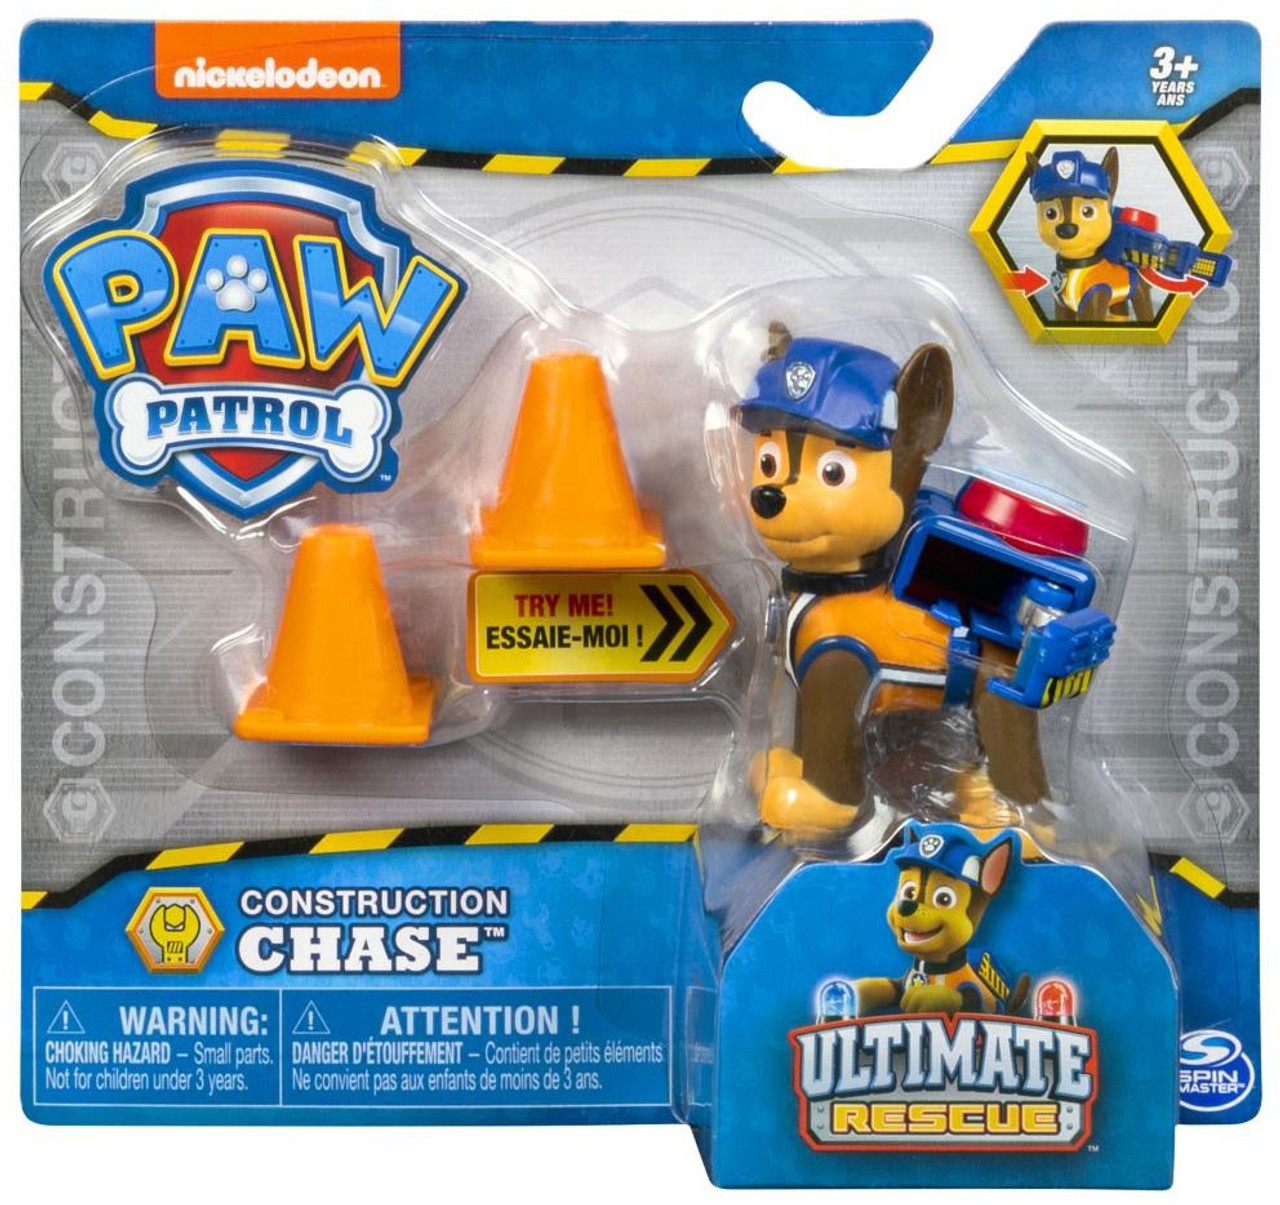 paw patrol chase ultimate rescue